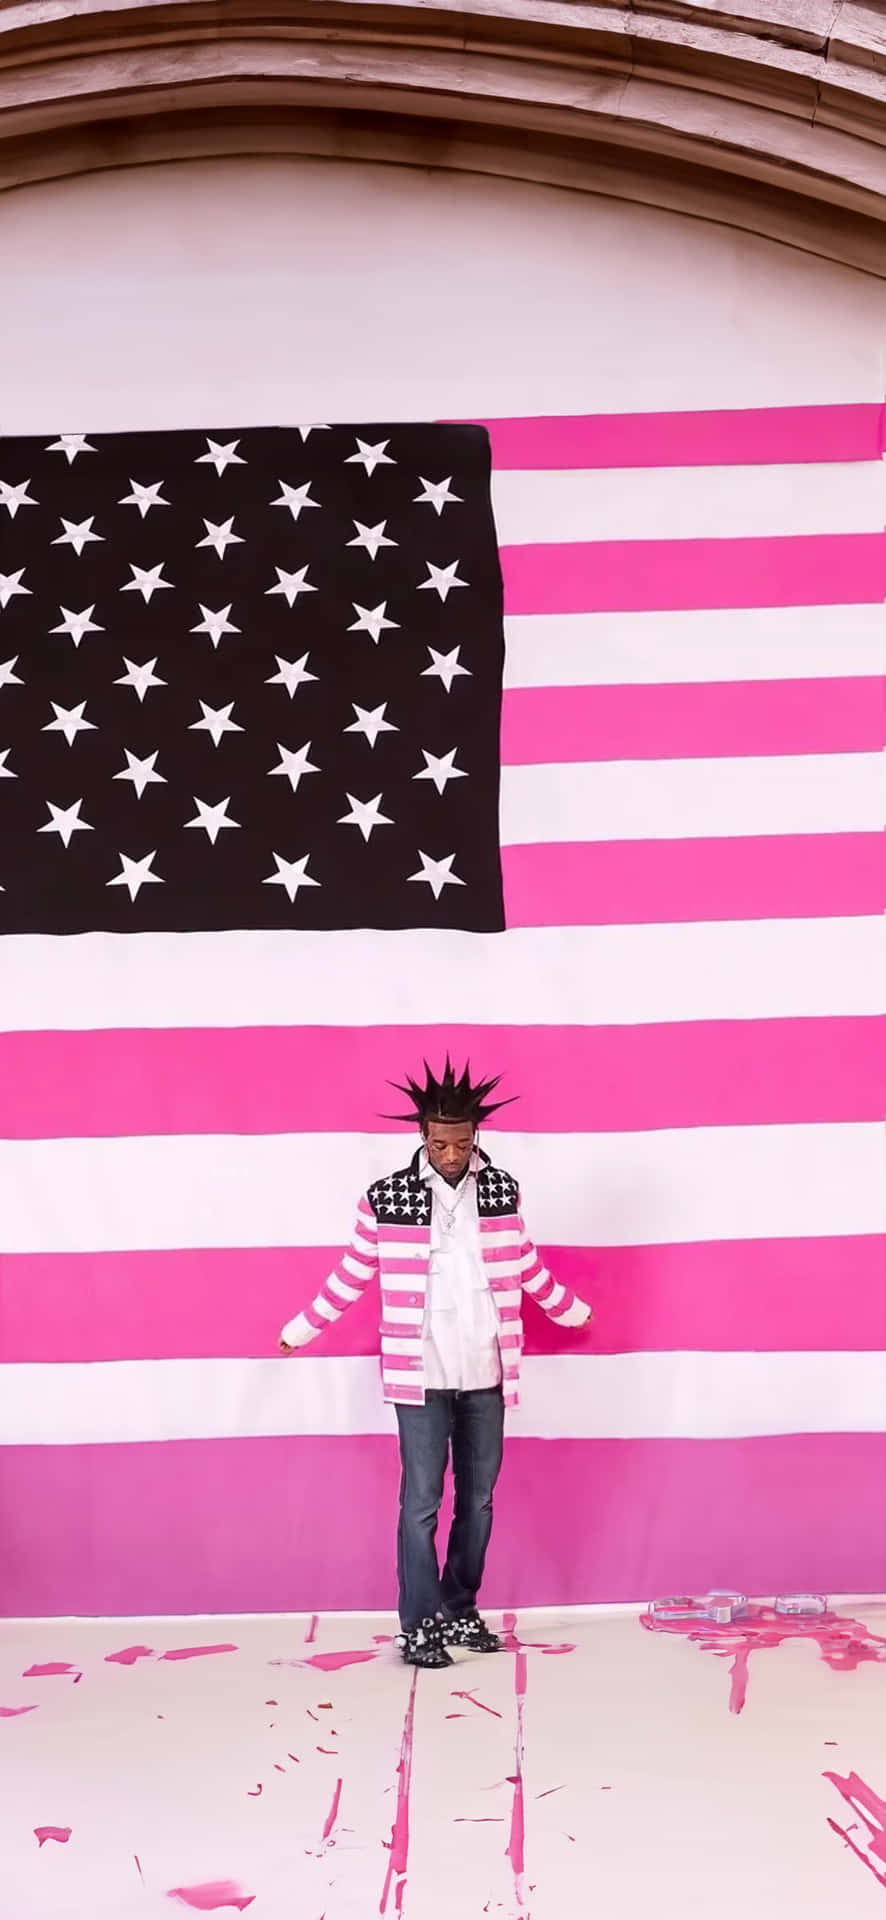 Person Before Pink Striped Flag Wallpaper